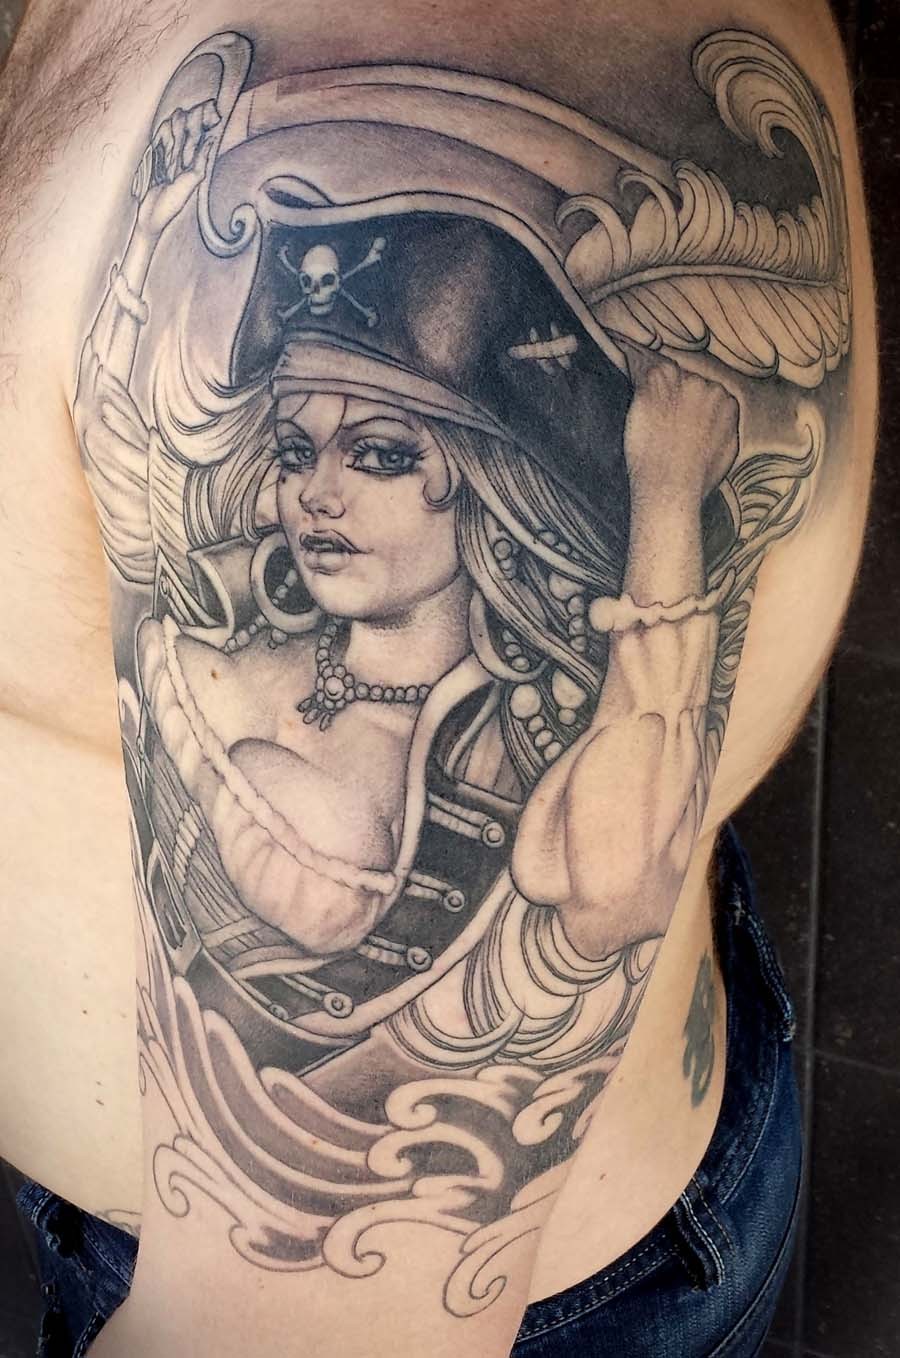 big boobed pirate lady tattoos by maarten